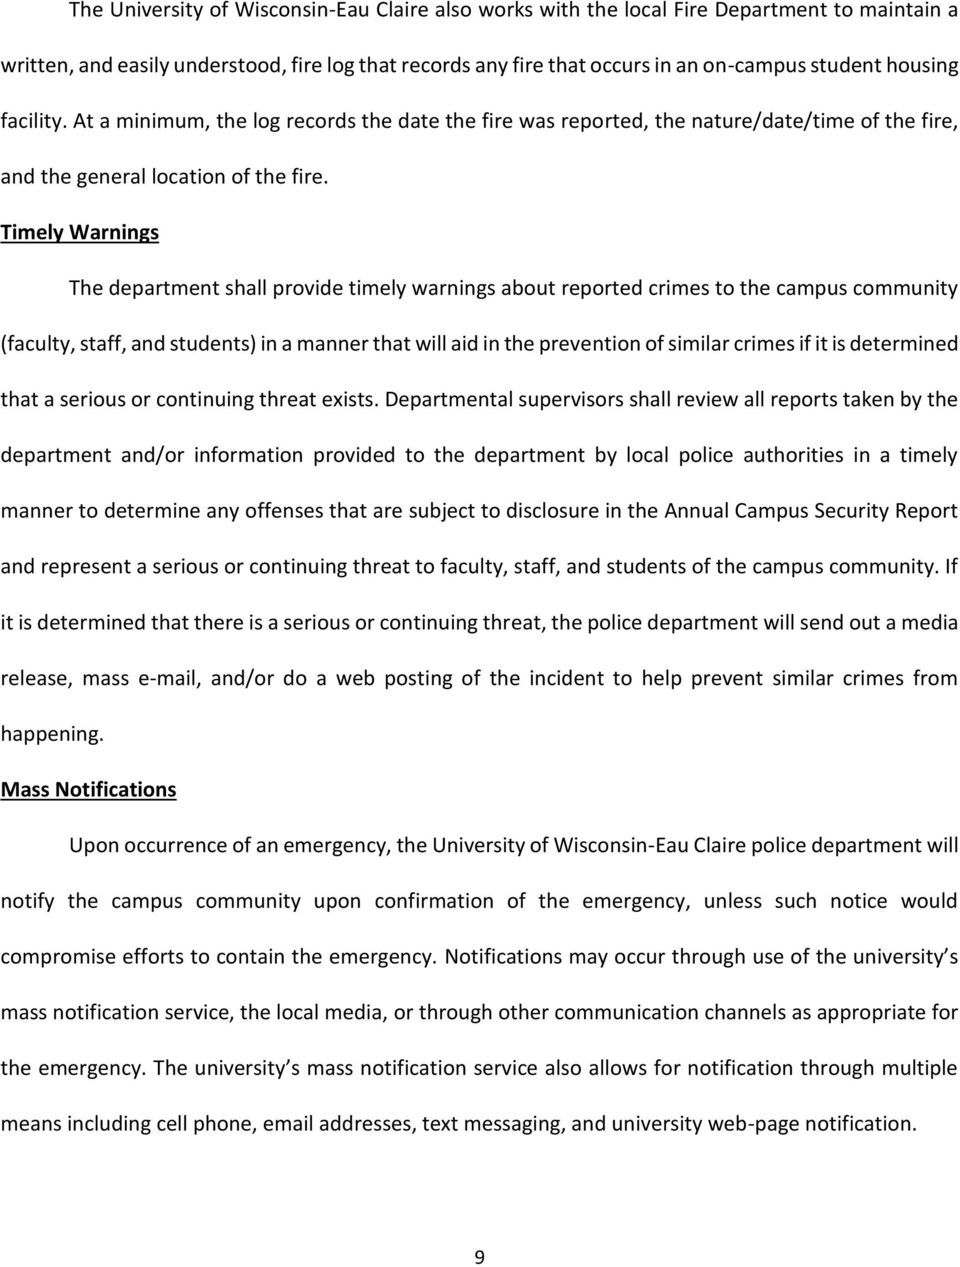 Timely Warnings The department shall provide timely warnings about reported crimes to the campus community (faculty, staff, and students) in a manner that will aid in the prevention of similar crimes